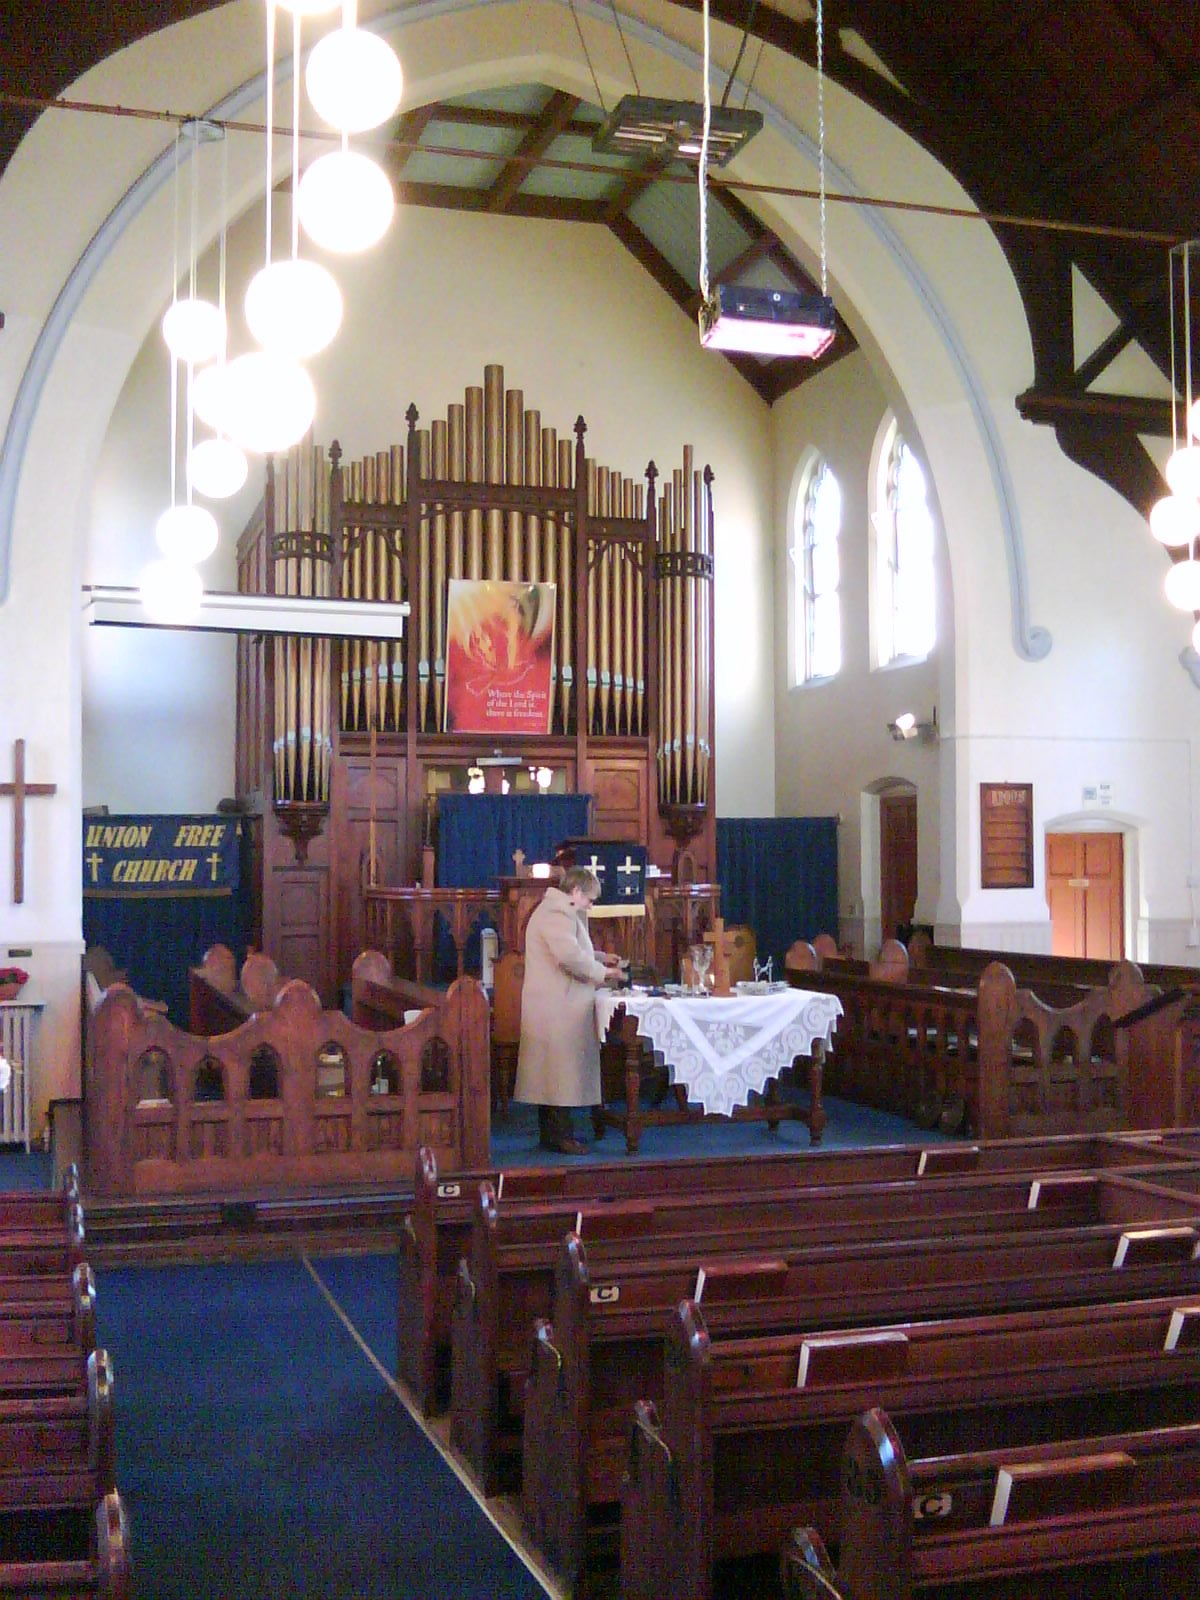 Looking towards the front and our well-loved organ.